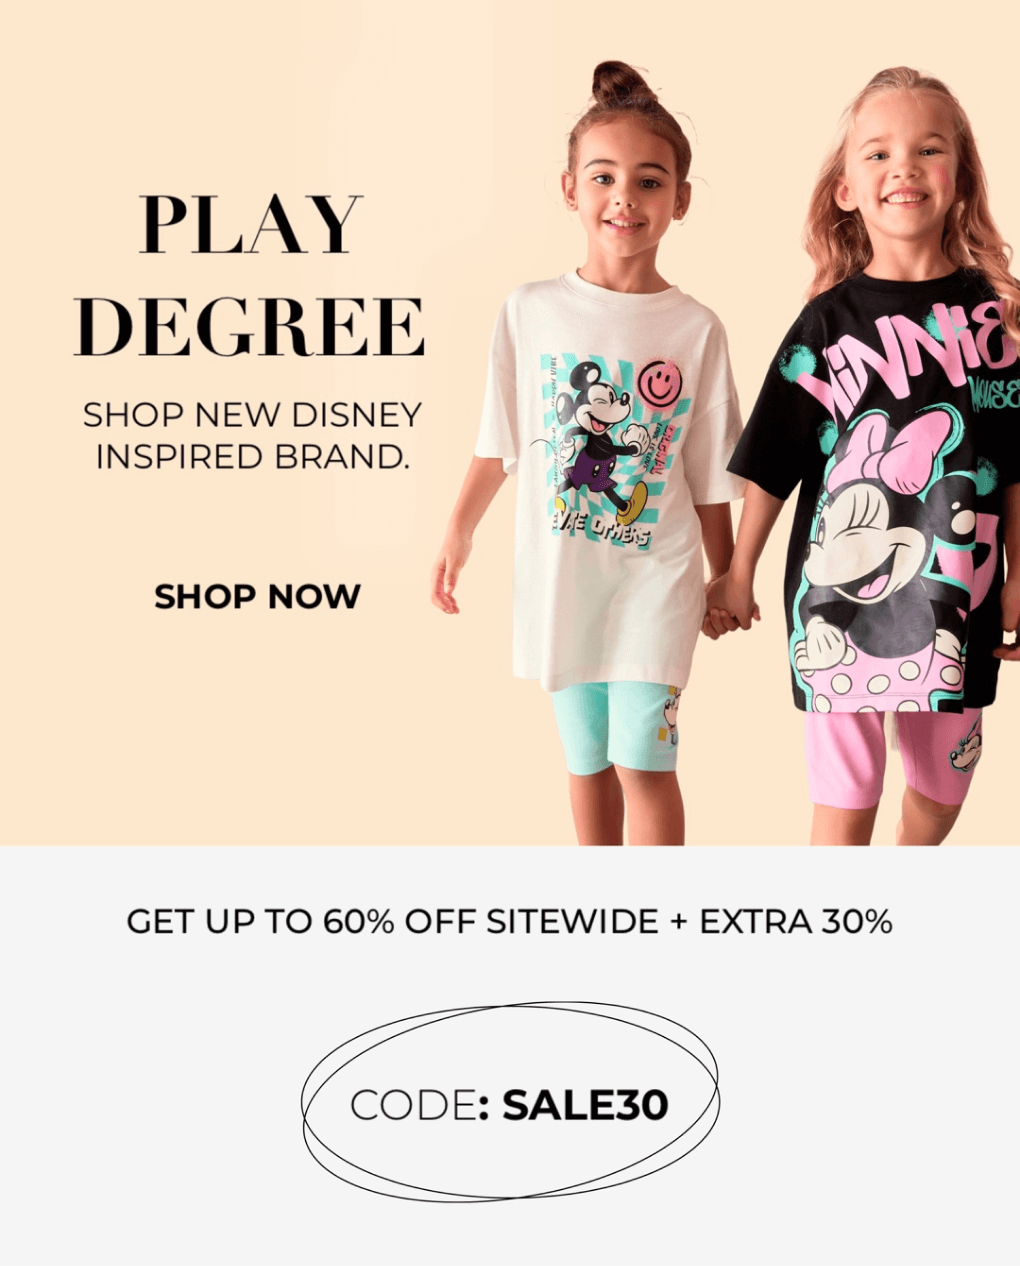 Play Degree - Shop New Disney Inspired Brand | Get Uo To 60% Off Sitewide + EXTRA 30% - code: SALE30